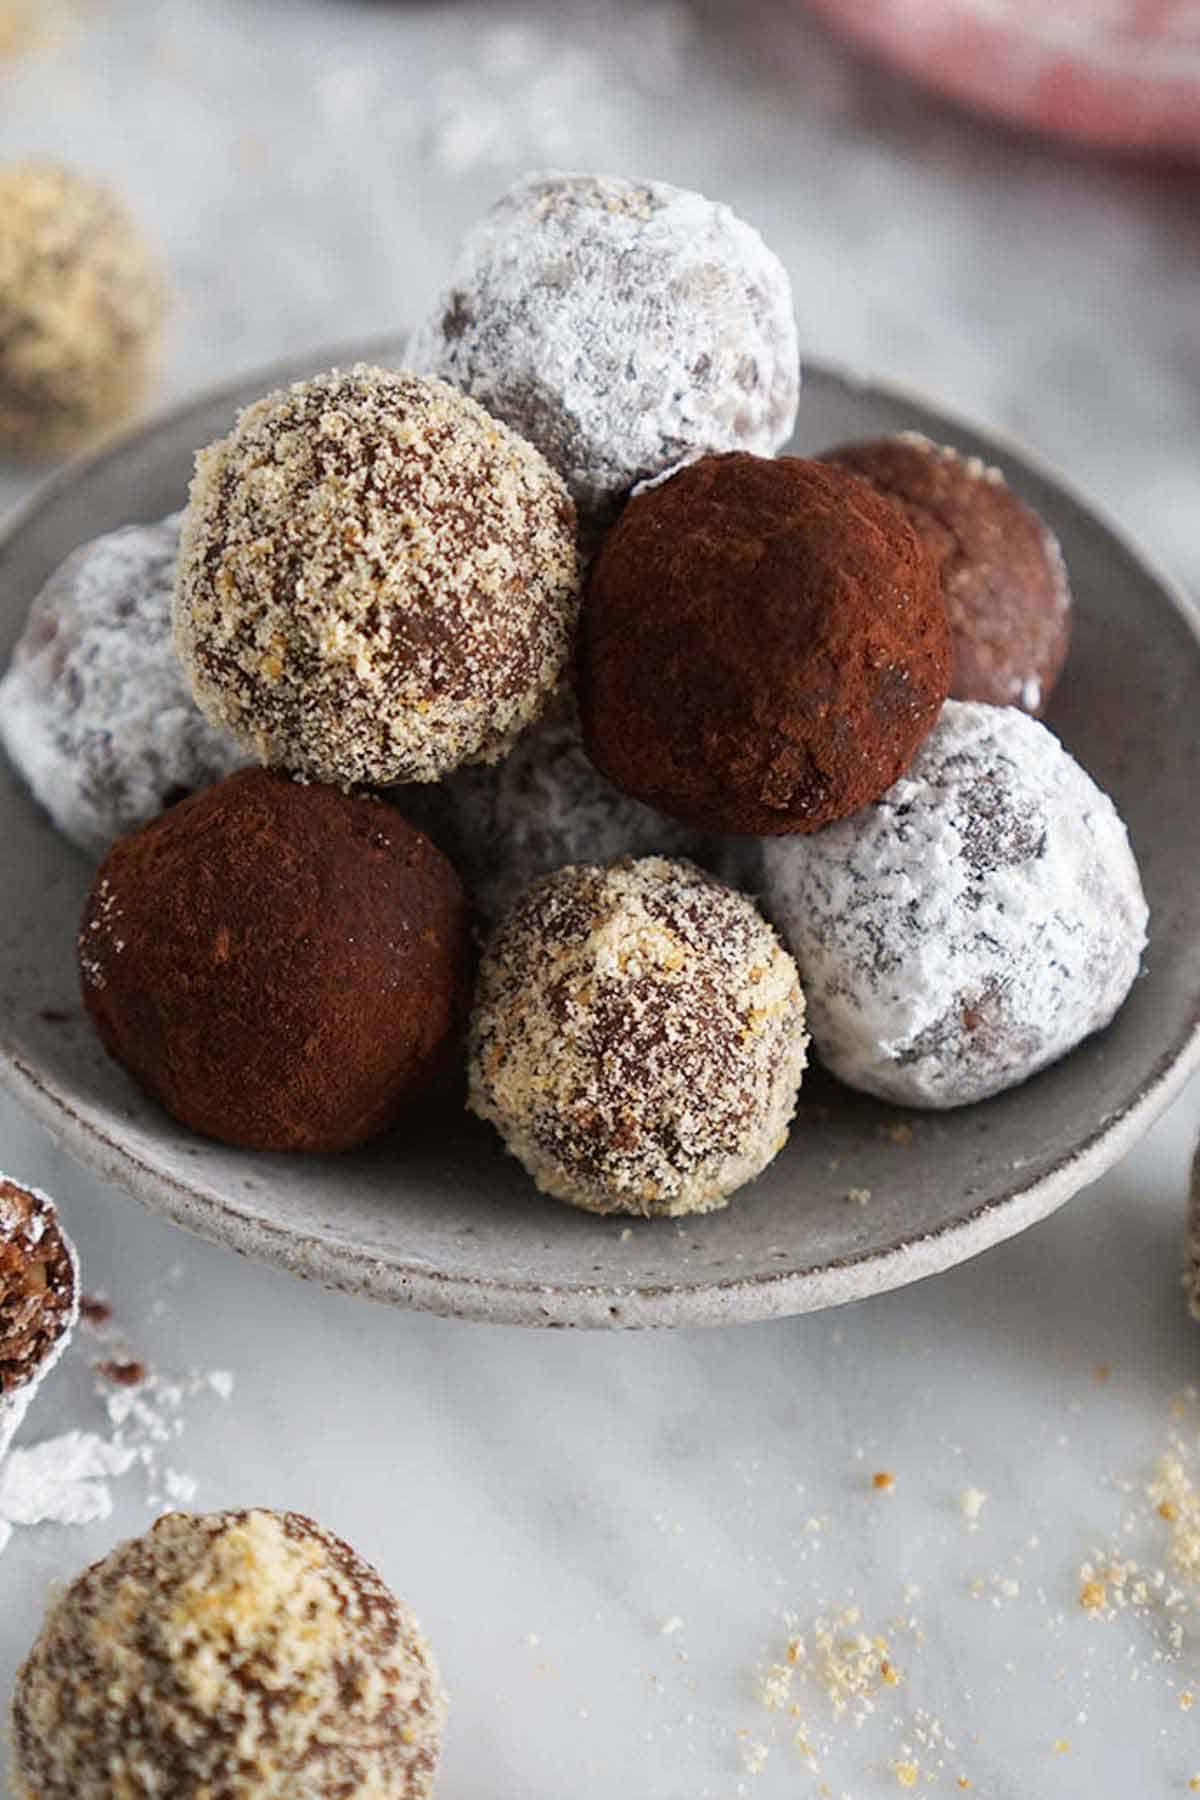 A plate of rum balls with an assortment of coatings.